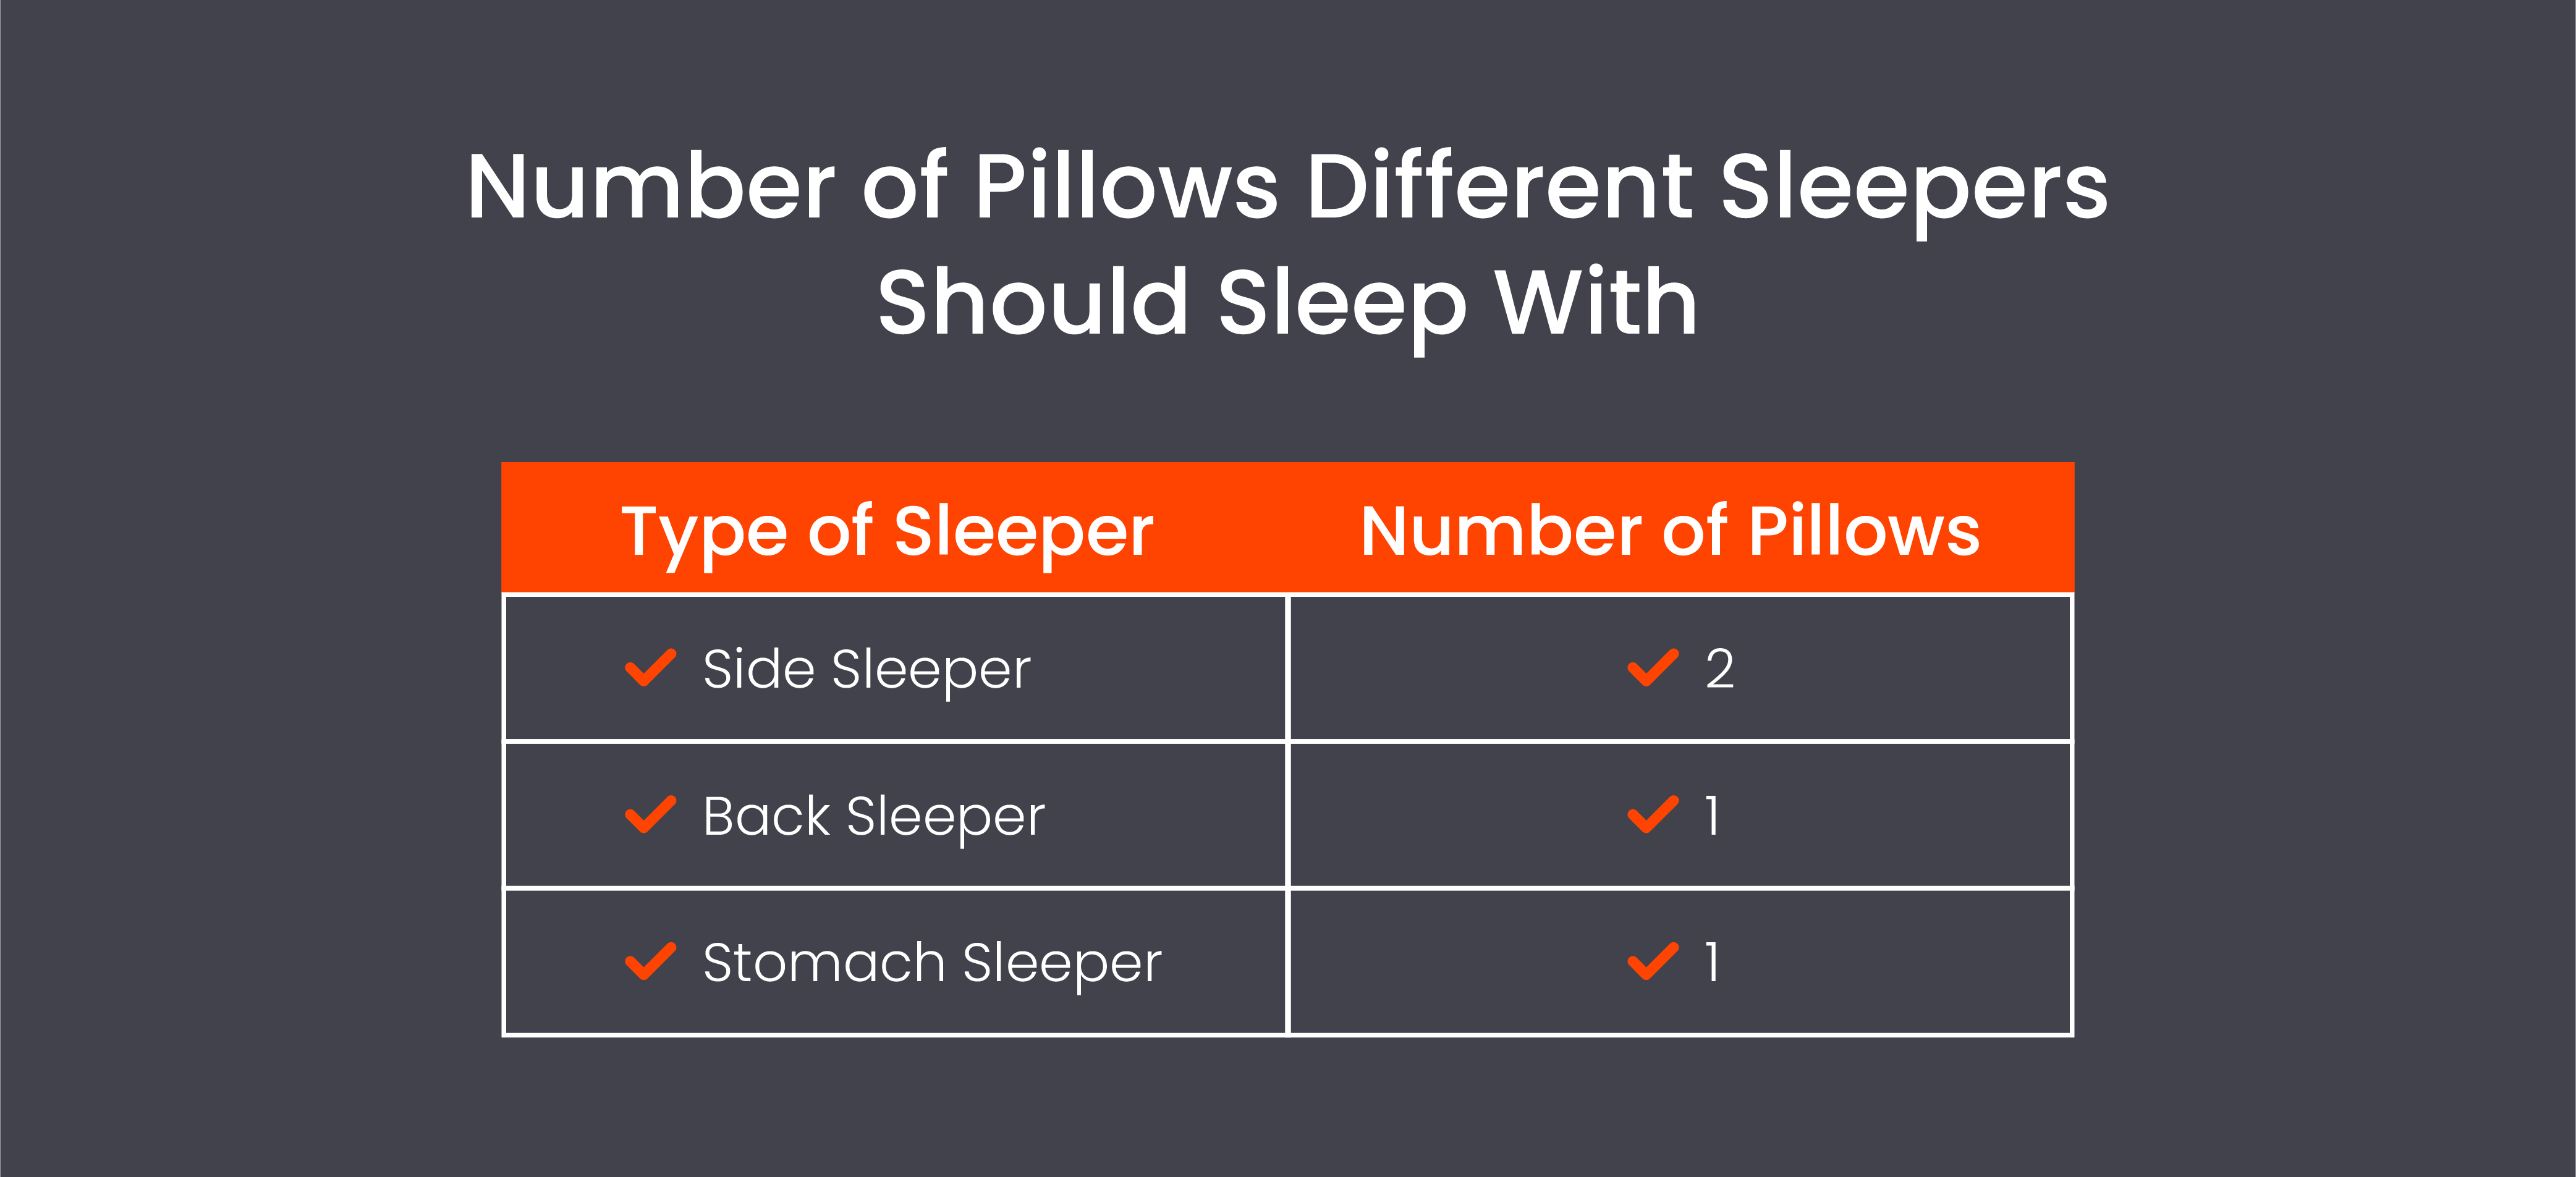 Number of pillows different sleepers should sleep with